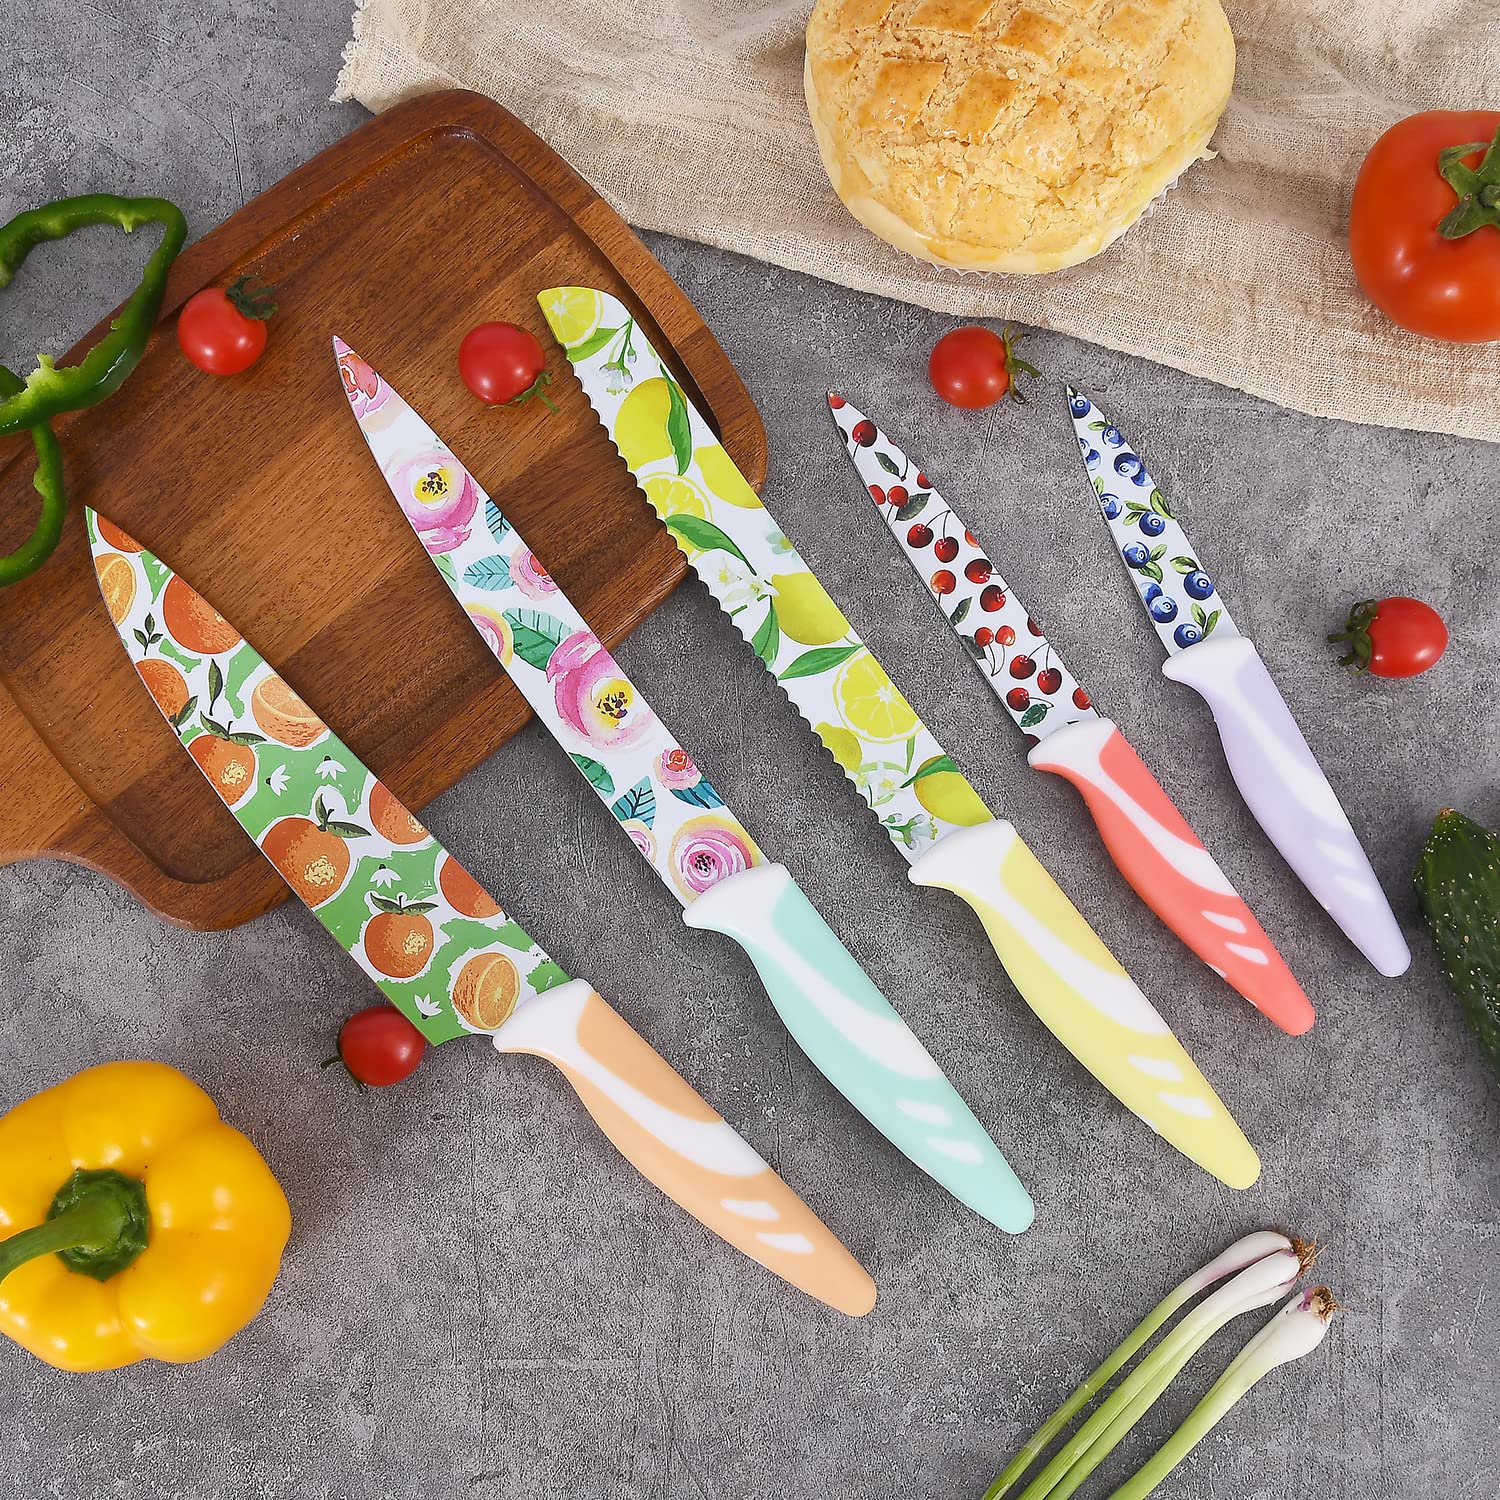 UPTRUST Knife Set, 10-piece Kitchen Knife Set Nonstick Coated with 5 Blade Guard, Multicolored Fruit Knives, Pioneer Woman Knife Set for Christmas Gifts